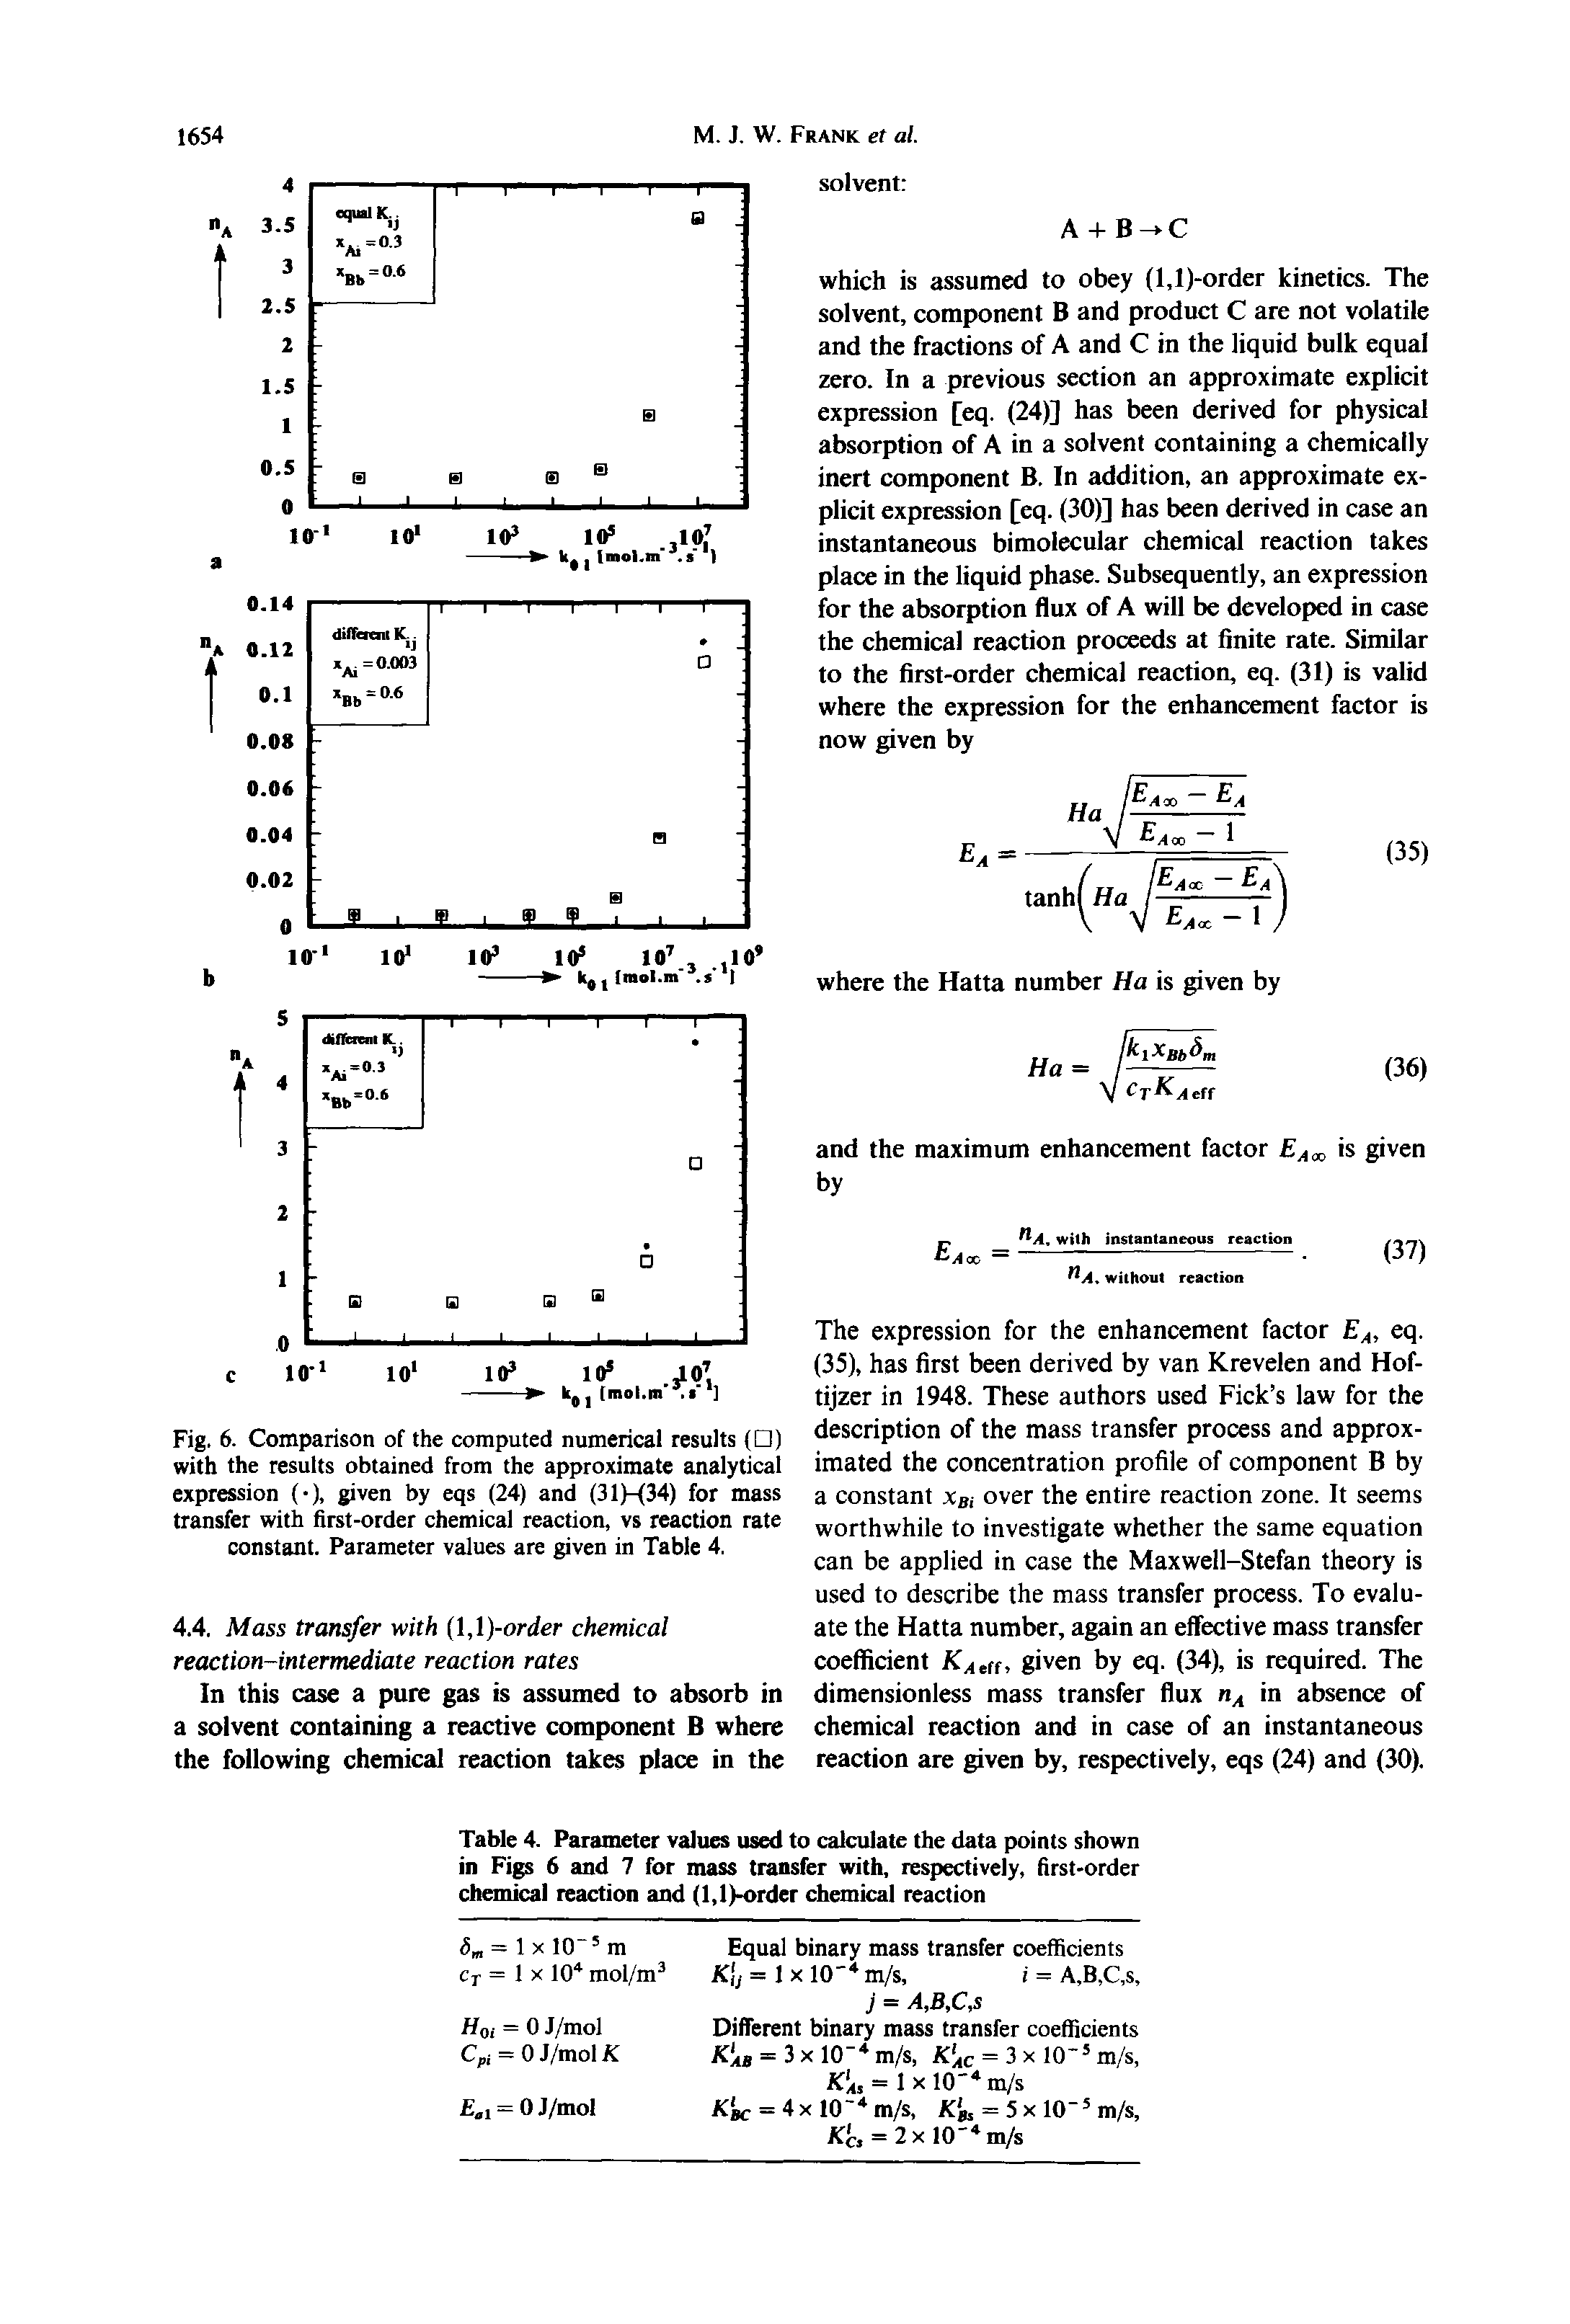 Fig. 6. Comparison of the computed numerical results ( ) with the results obtained from the approximate analytical expression ( ), given by eqs (24) and (31)-(34) for mass transfer with first-order chemical reaction, vs reaction rate constant. Parameter values are given in Table 4.